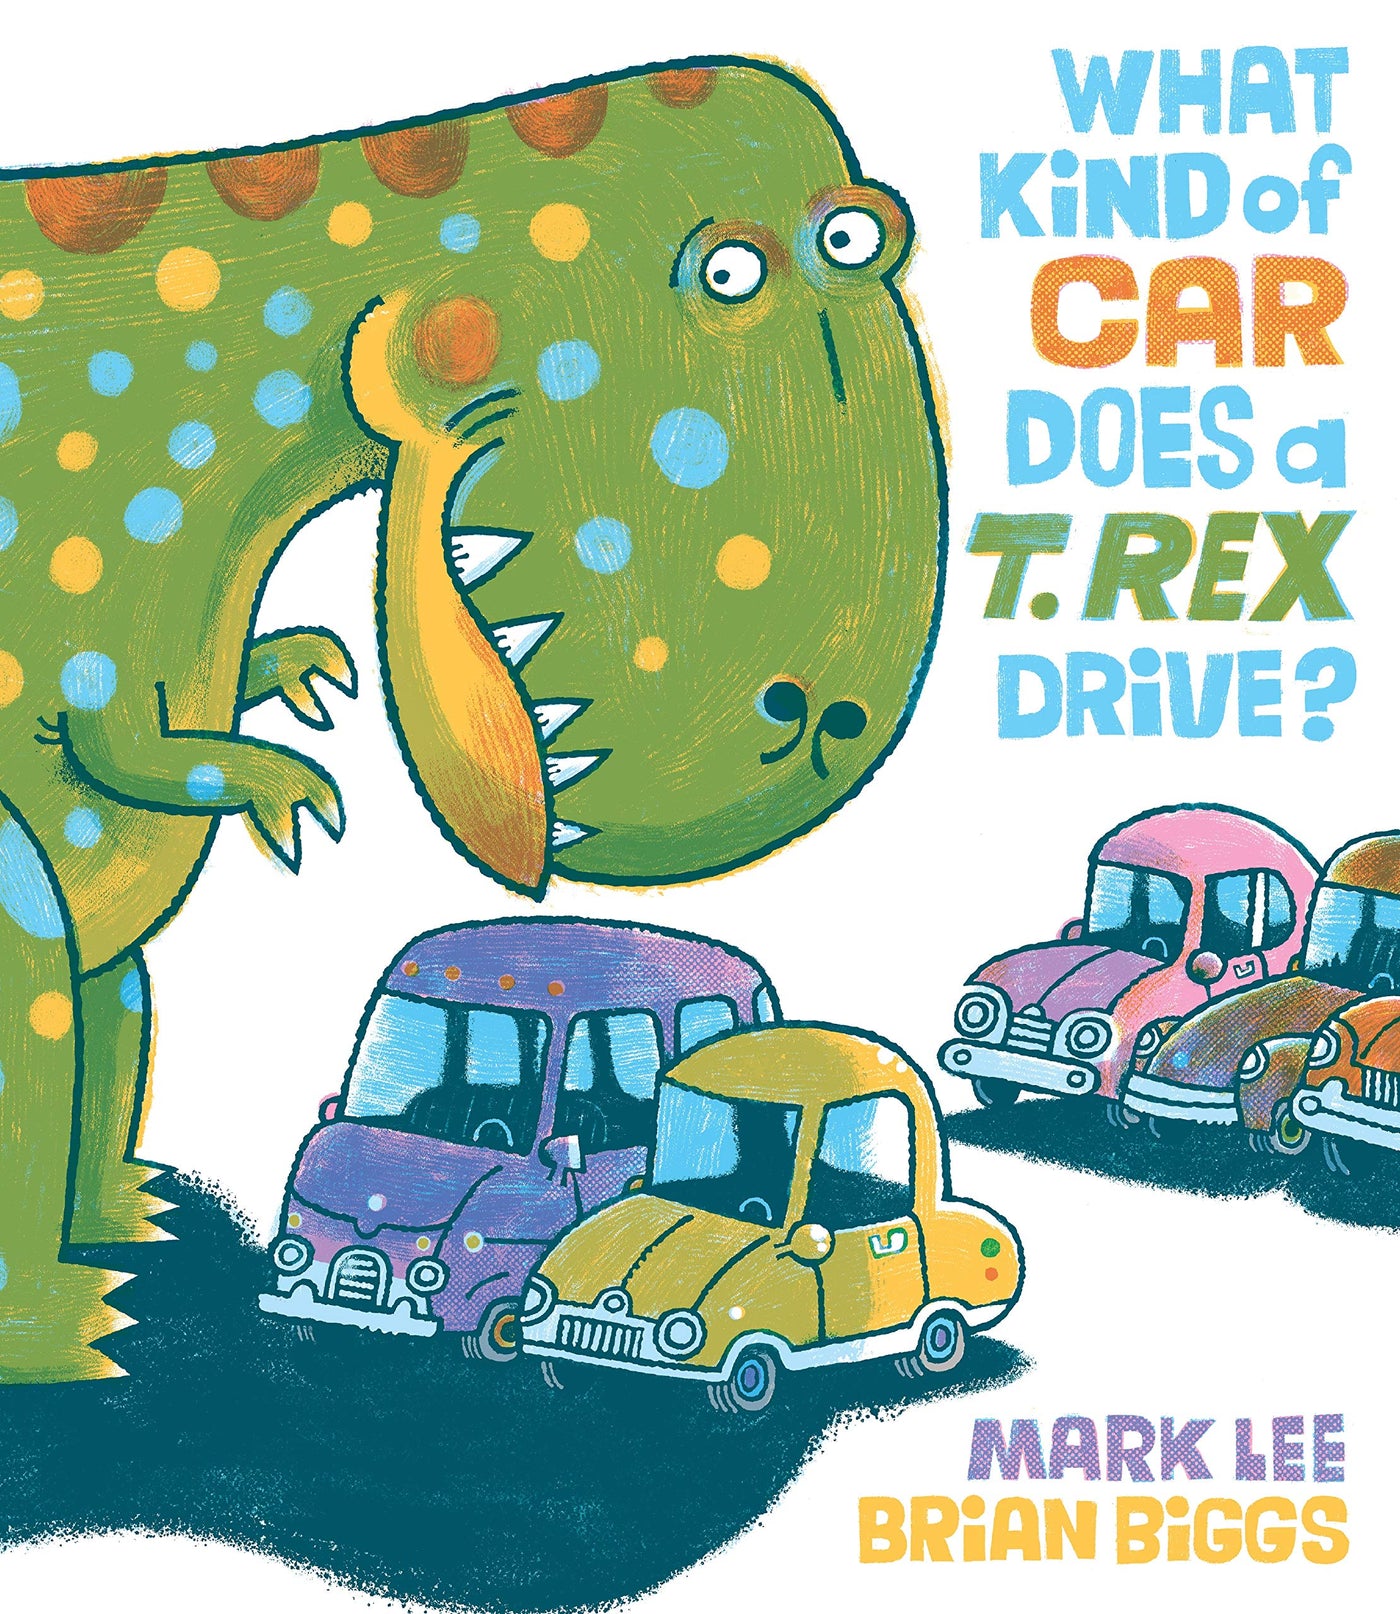 What Kind of Car Does a T.Rex Drive?